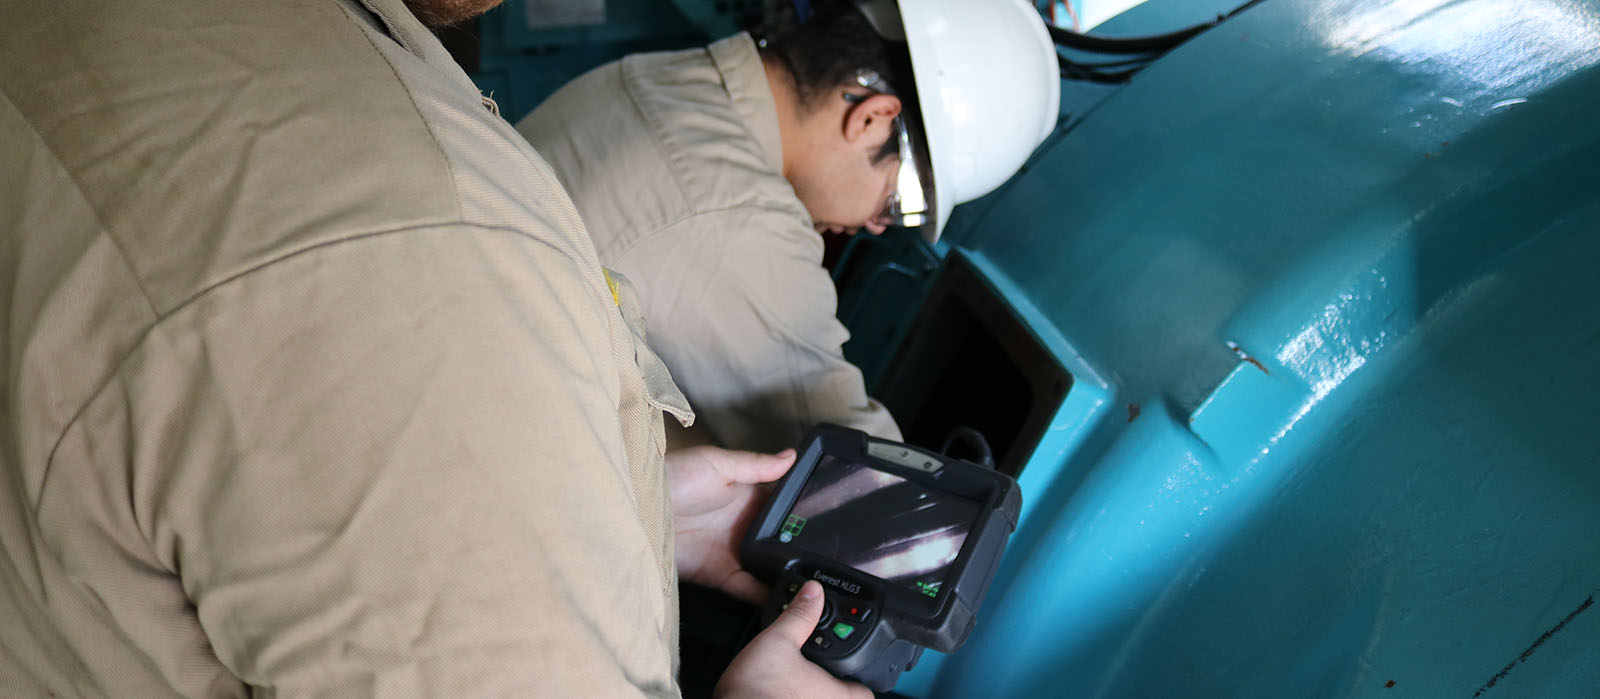 Students from Northeastern Junior College learn using borescope donated by NextEra Energy.